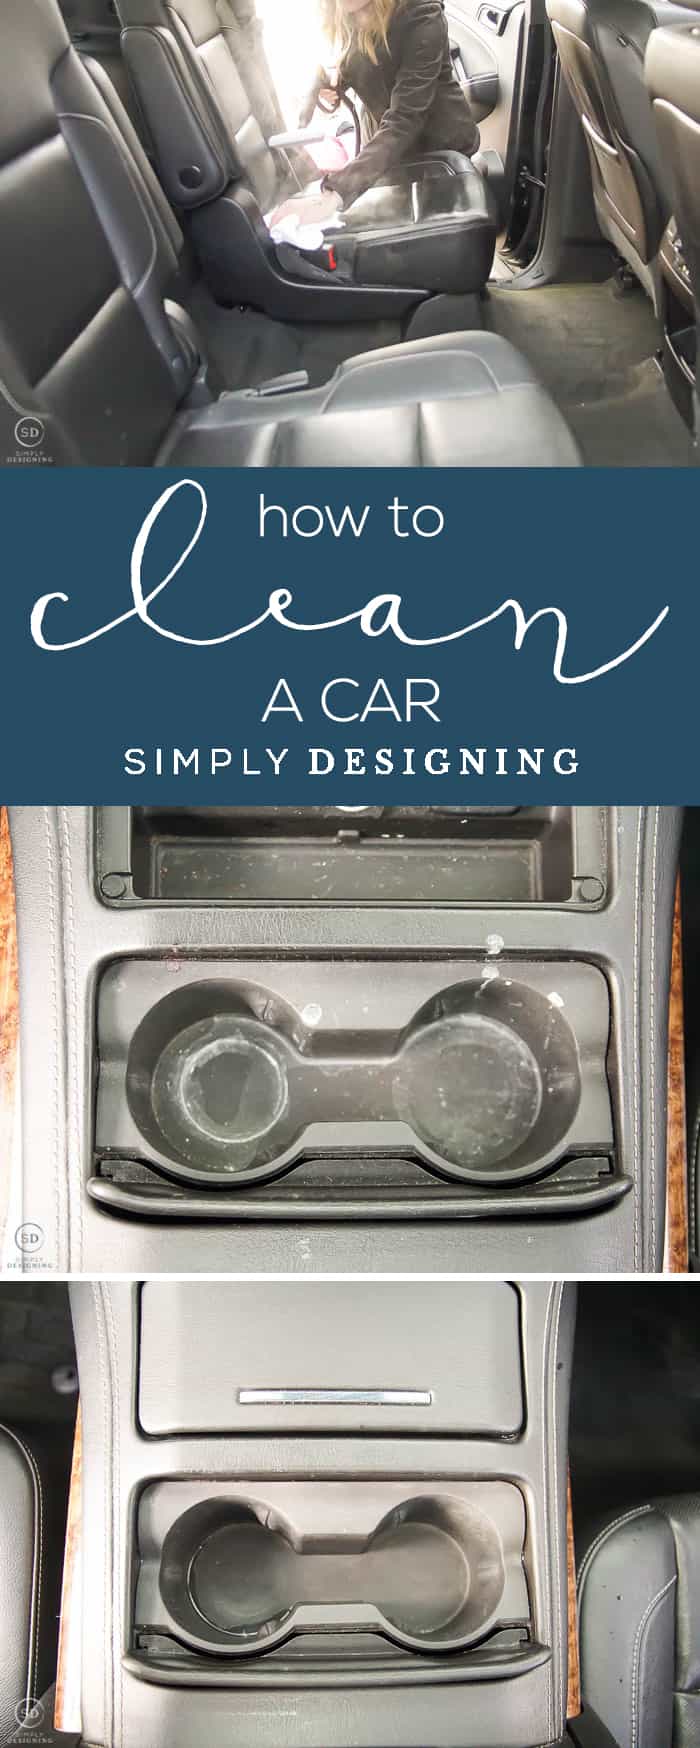 How to Clean a Car - the best and easiest way to clean and sanitize a car